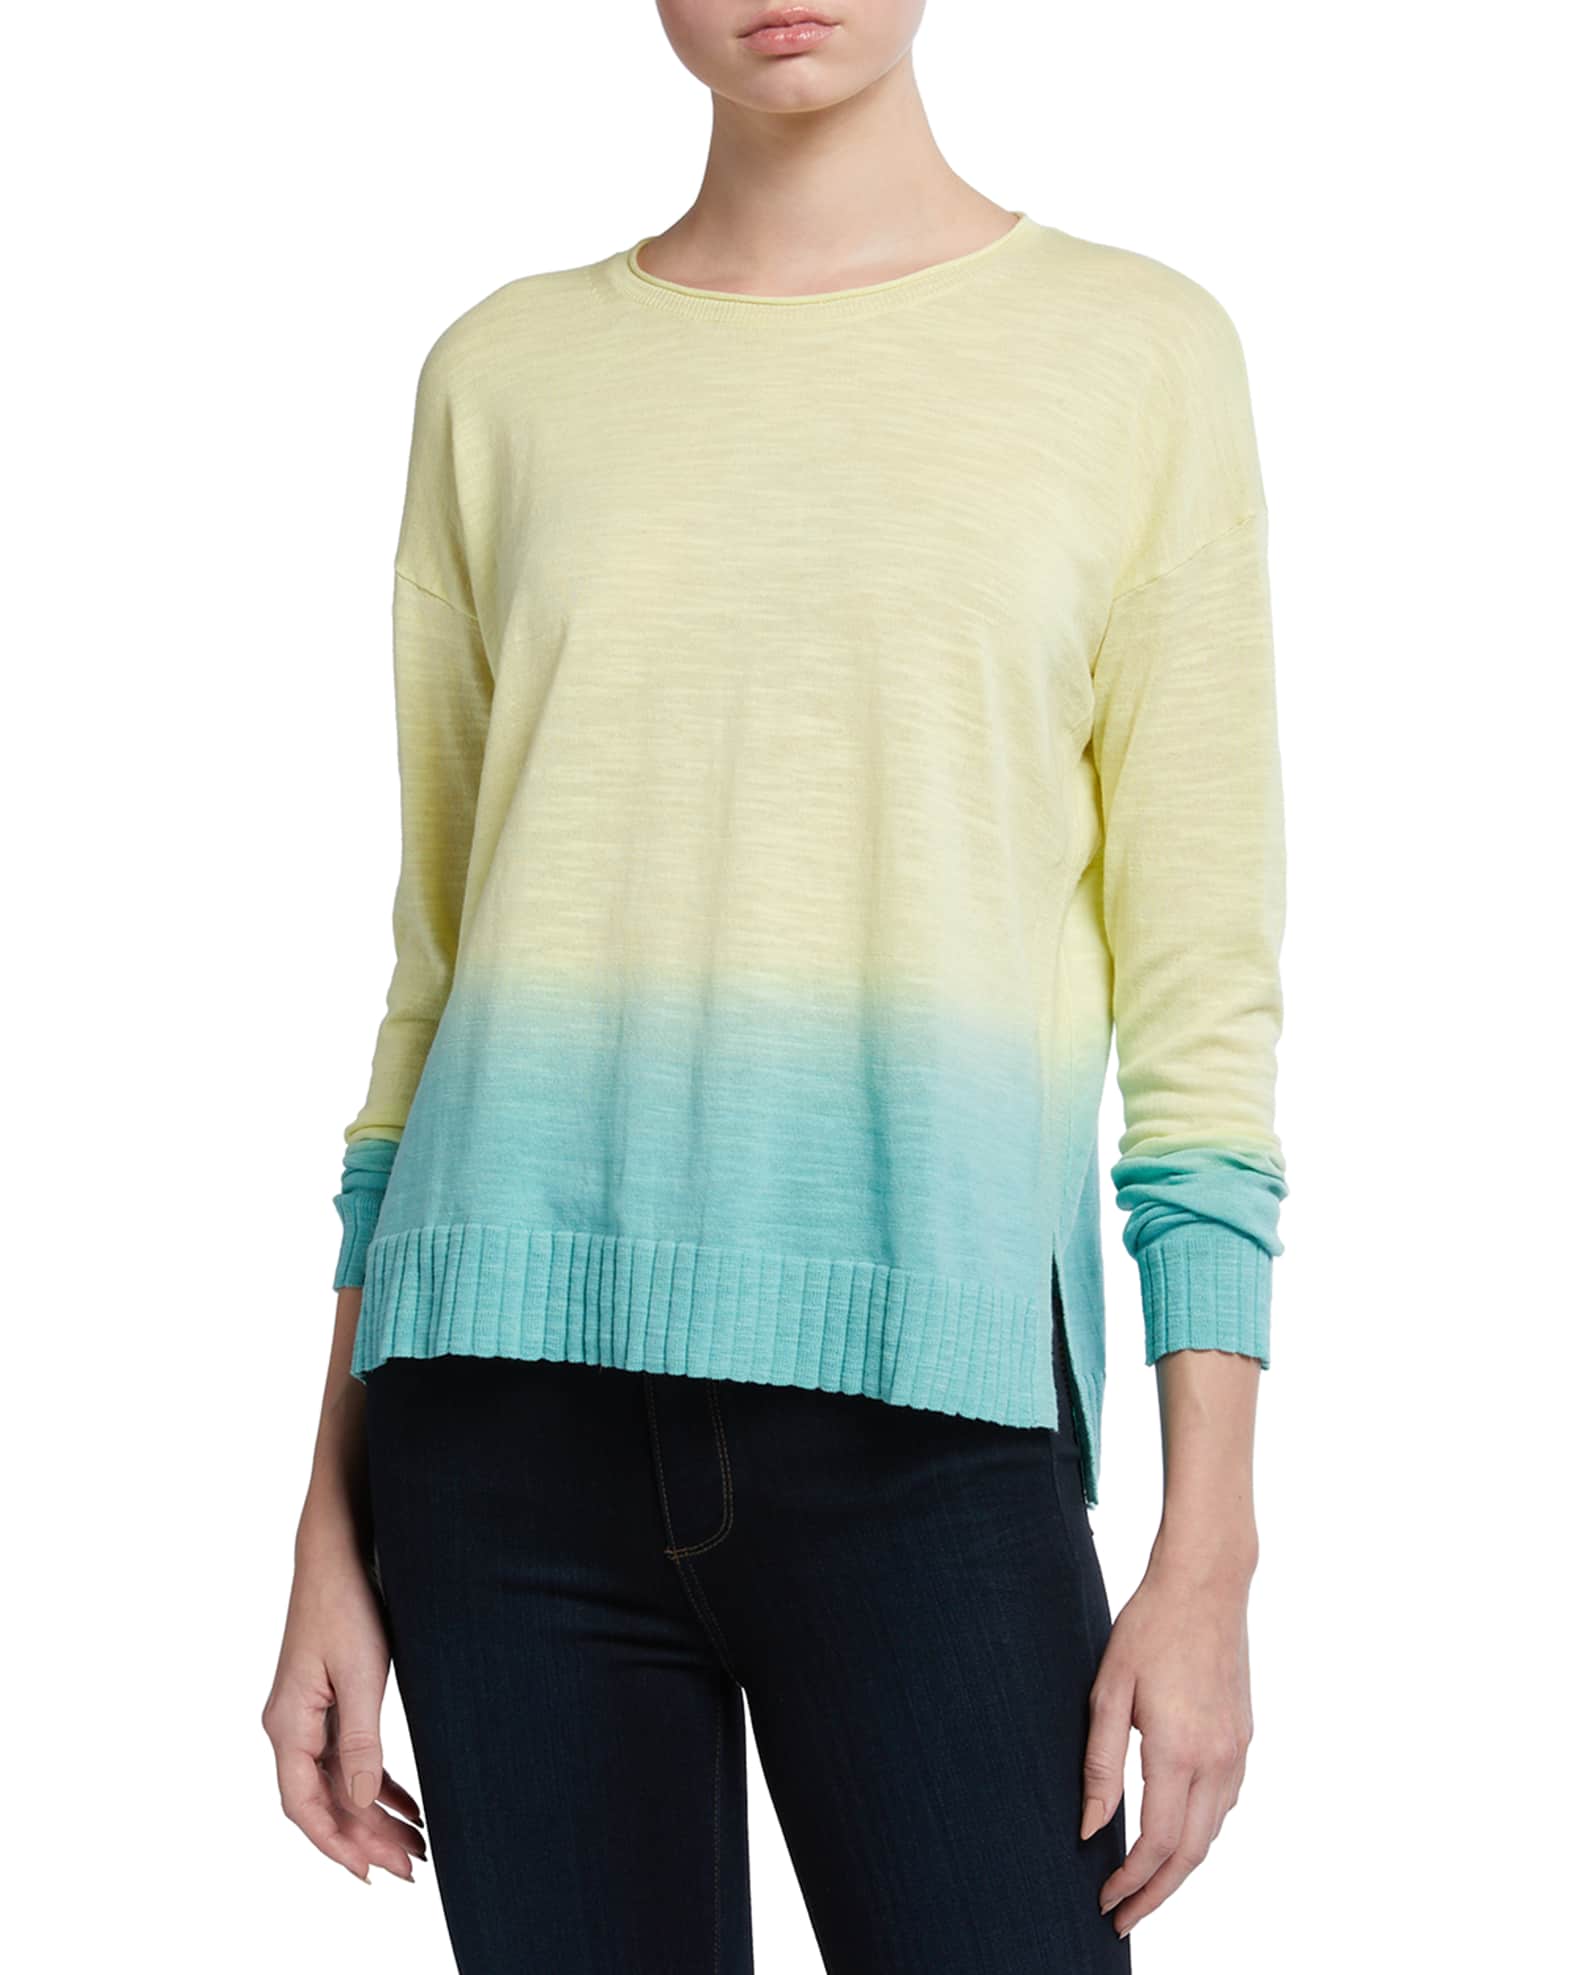 Lisa Todd Petite Dipped Ombre Cotton Sweater | Neiman Marcus